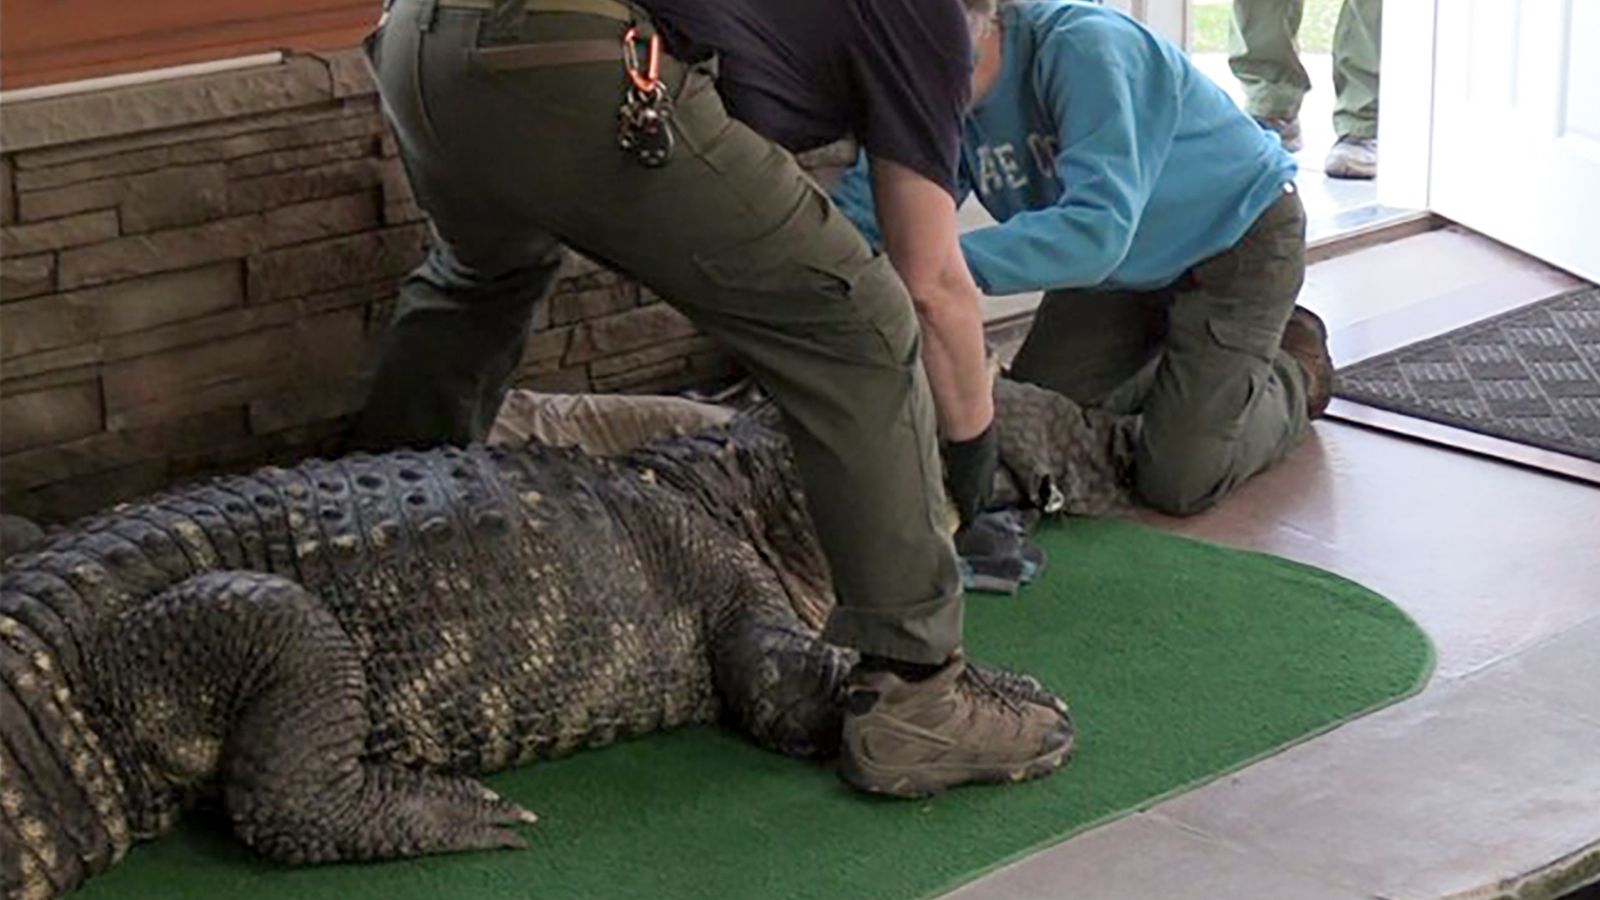 Alligator twice the size of a man seized after being kept illegally in home